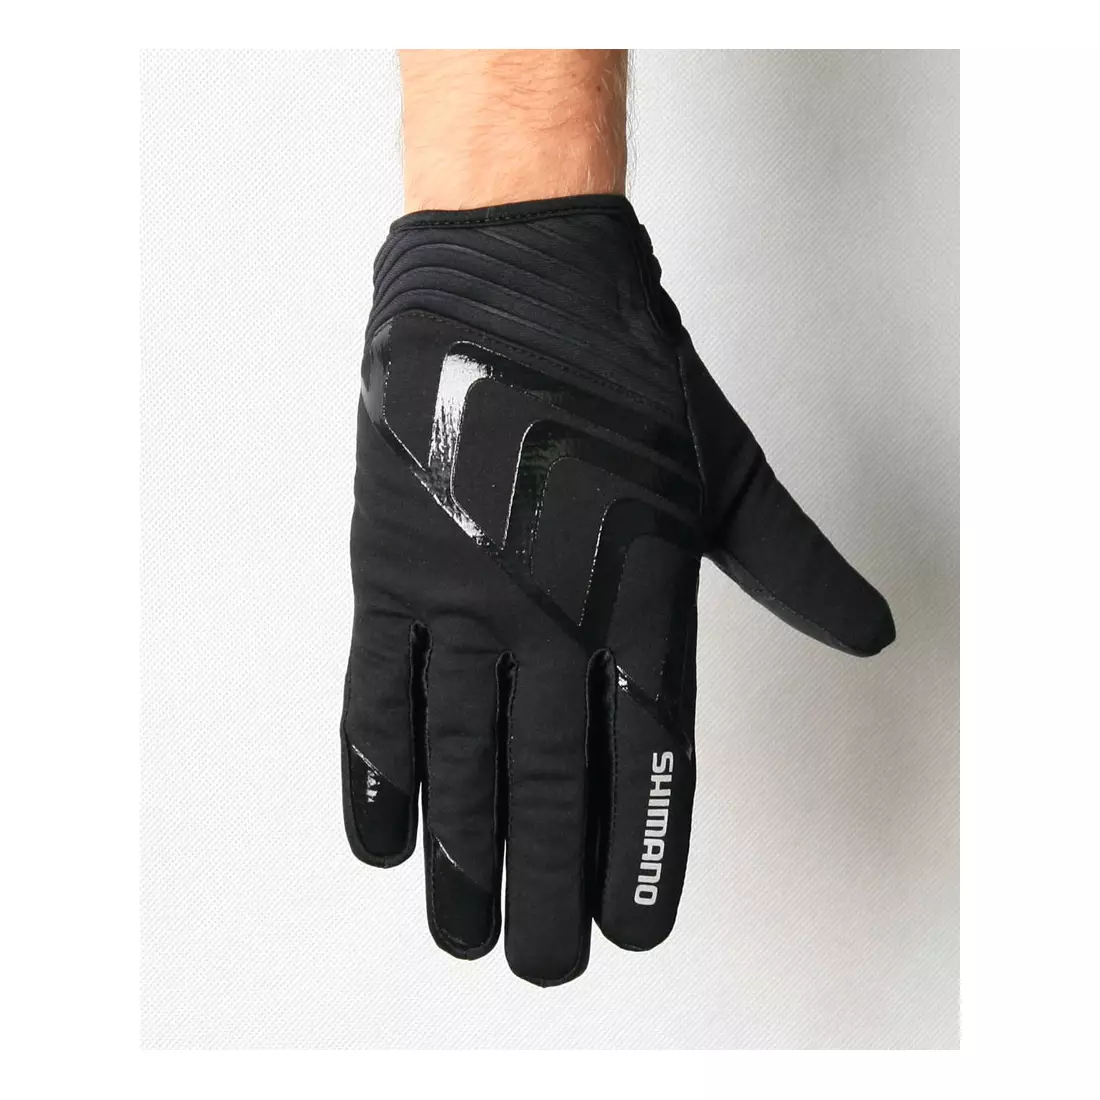 SHIMANO WINDBREAK All Condition winter cycling gloves CW-GLBW-MS52ML